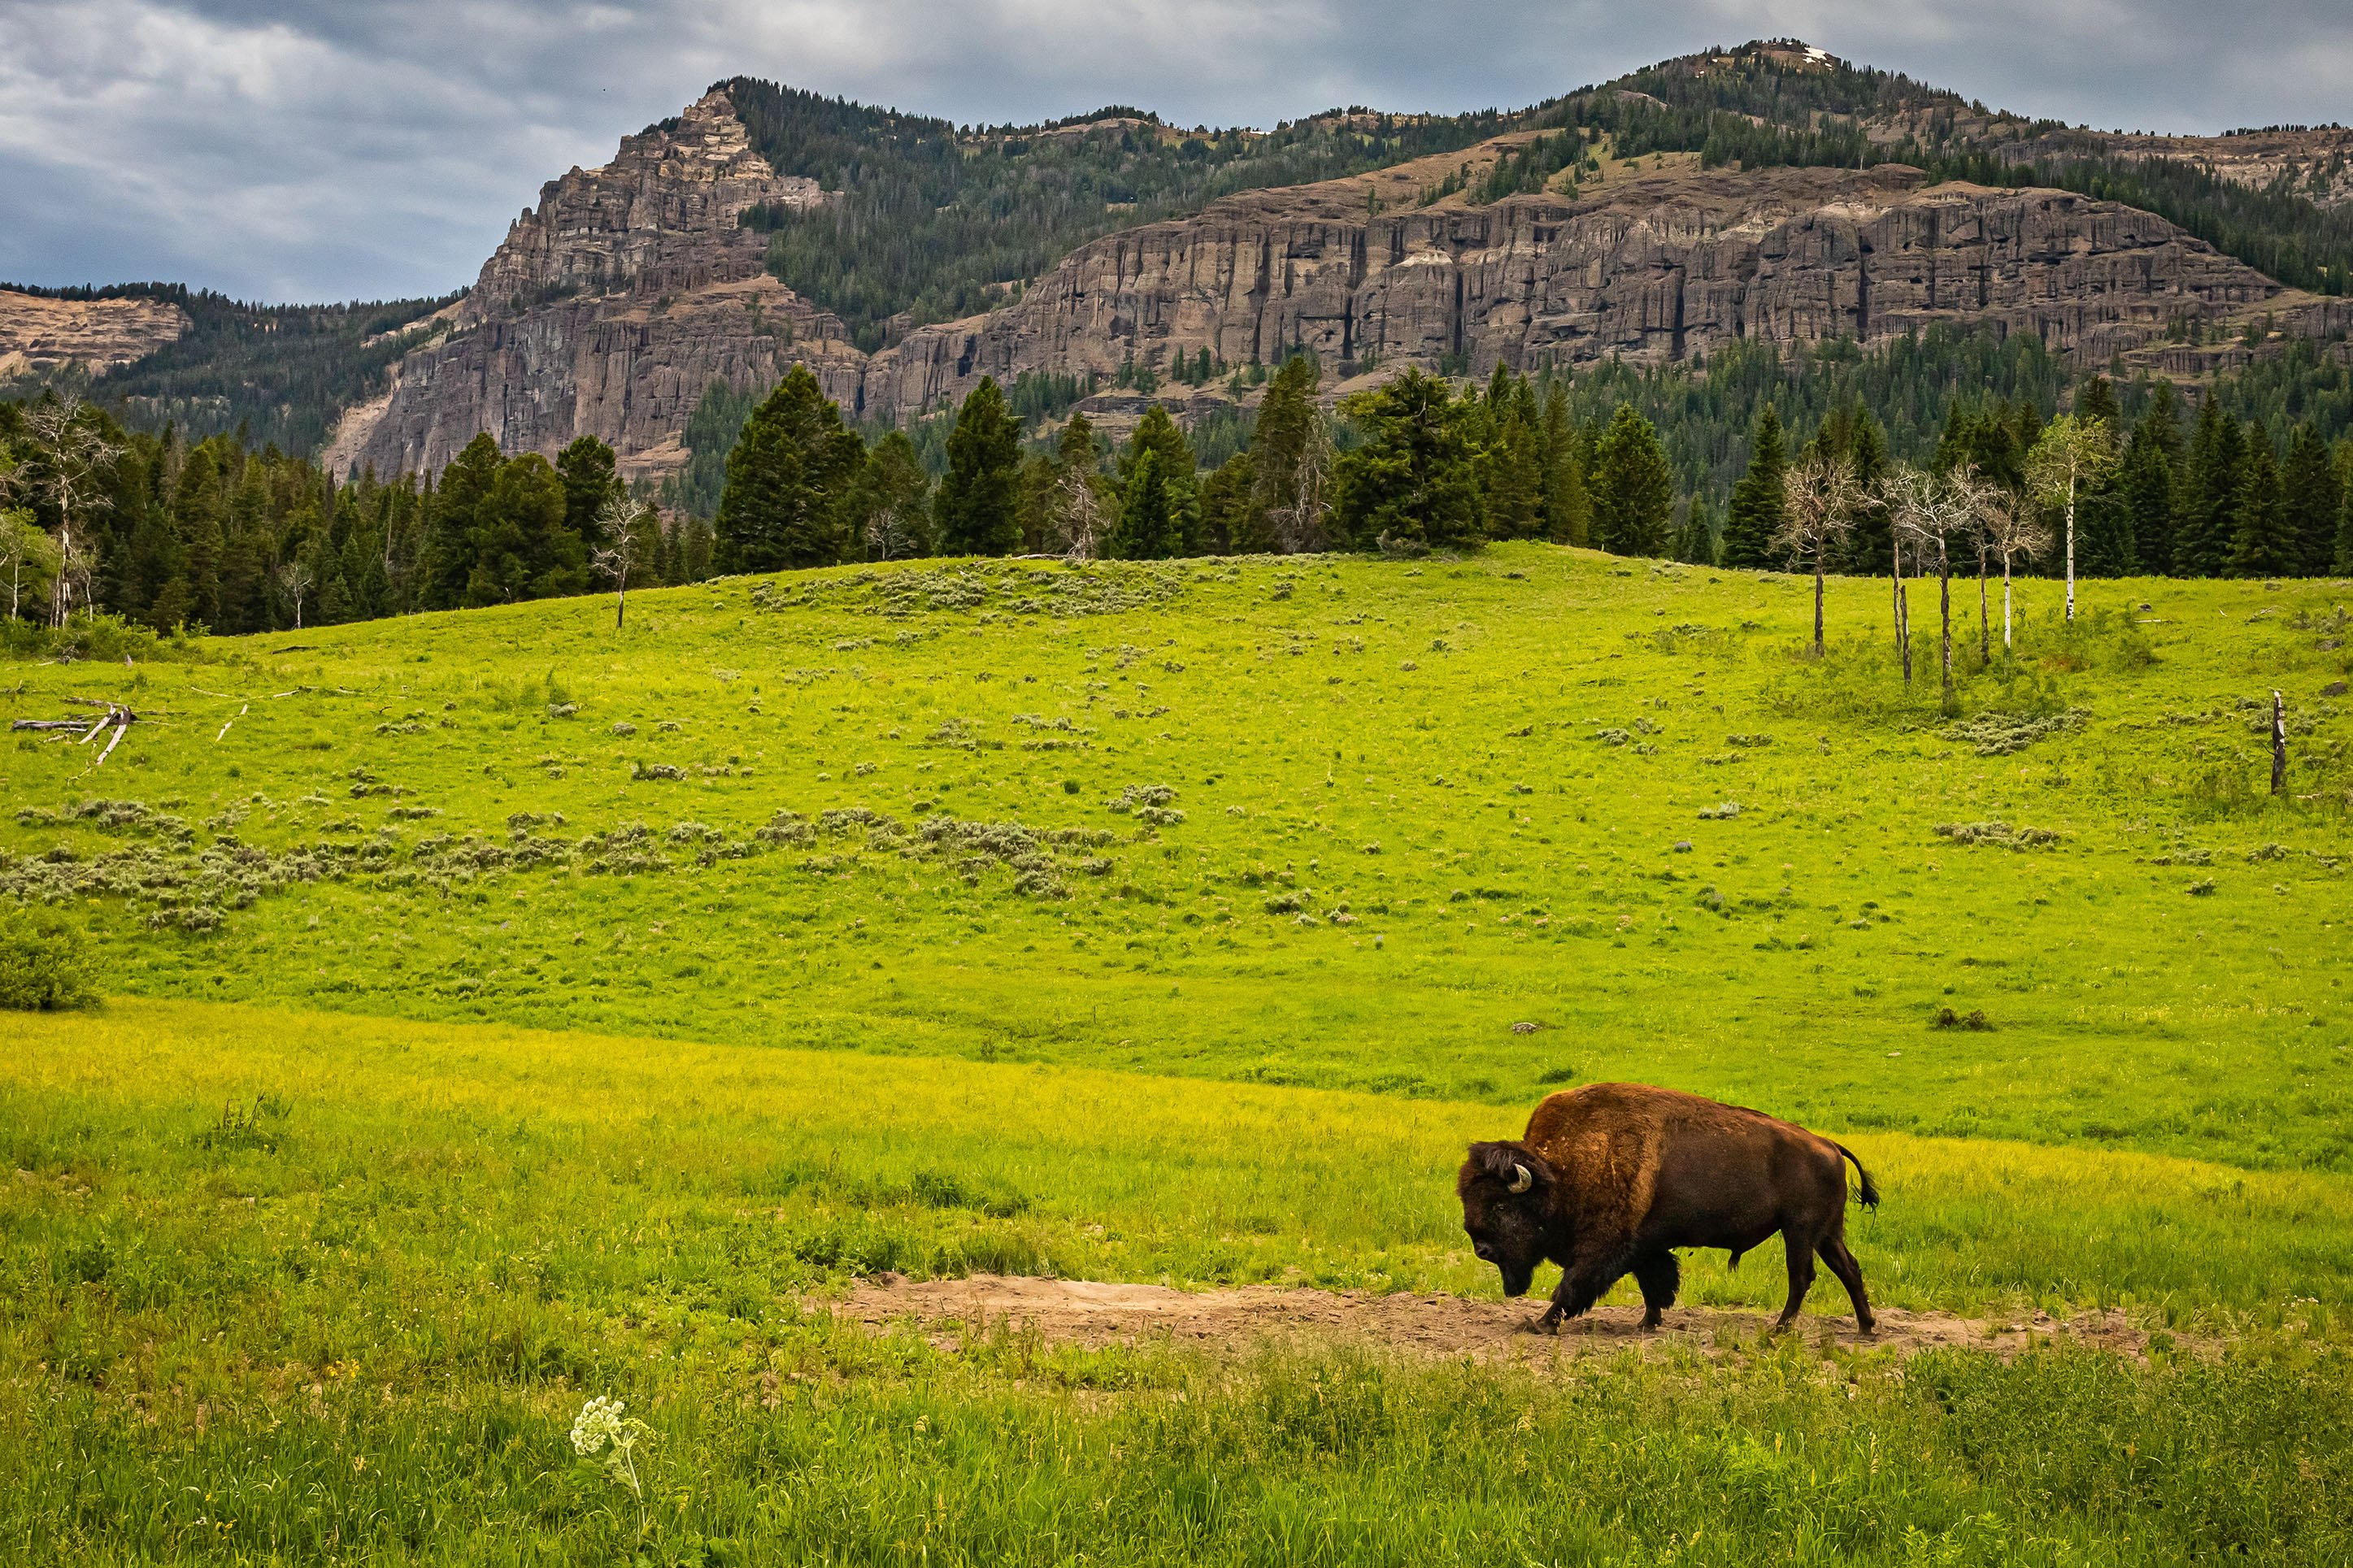 Bison in Yellowstone National Park in the Spring